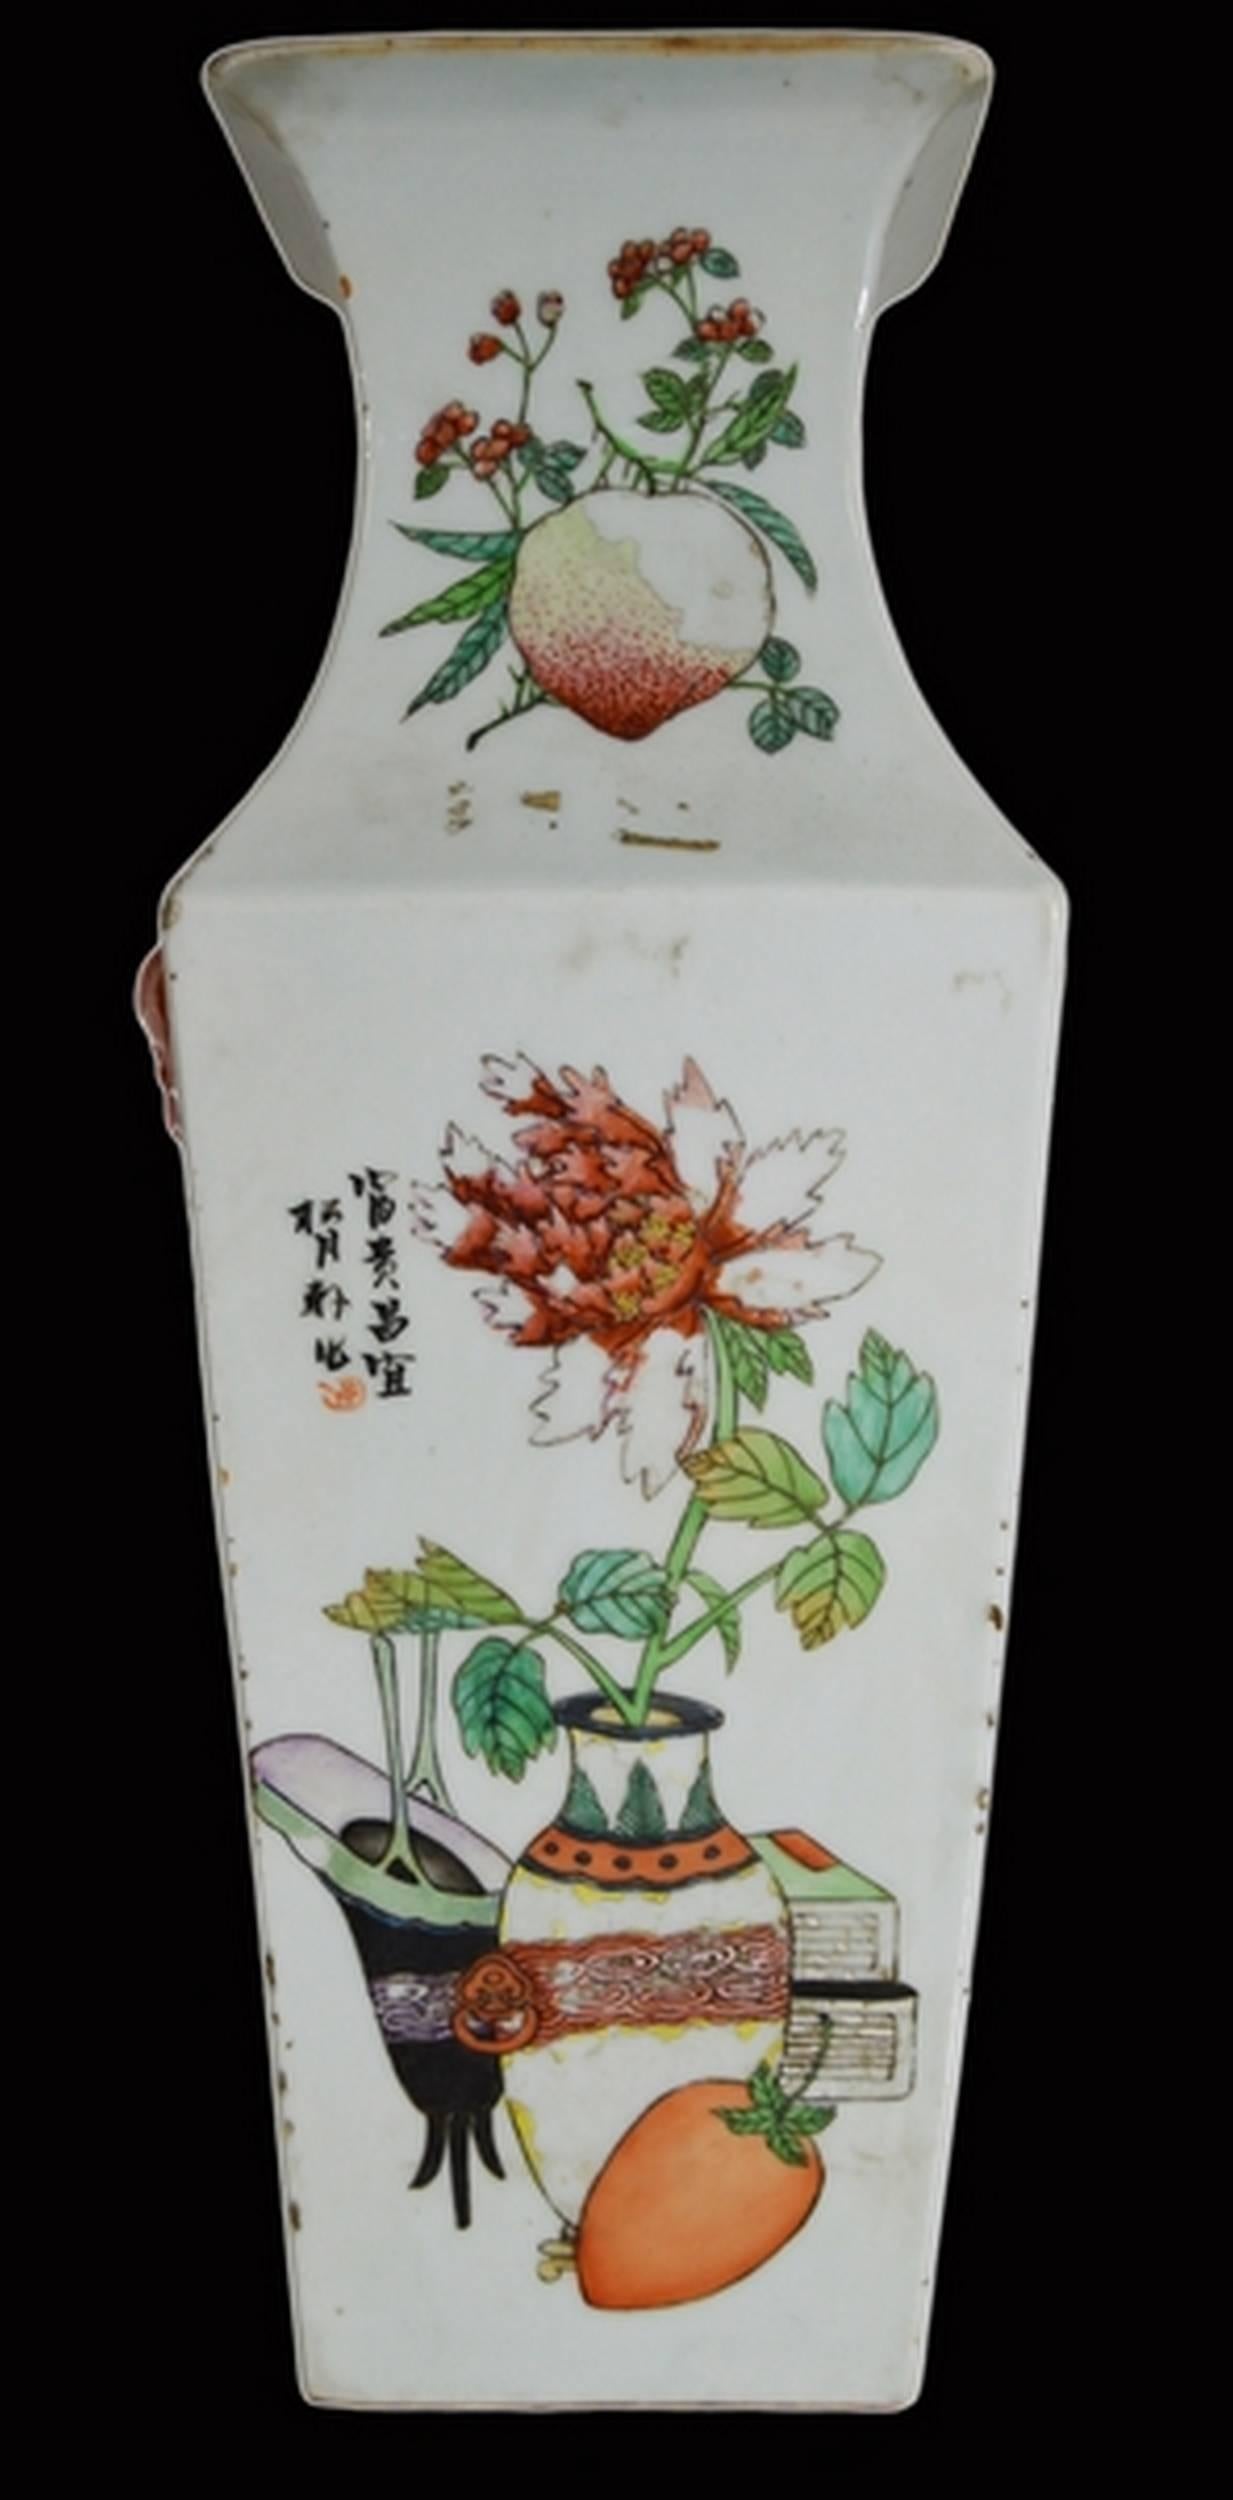 Chinese Antique Hand-Painted Porcelain Vase with Scenes from 19th Century, China For Sale